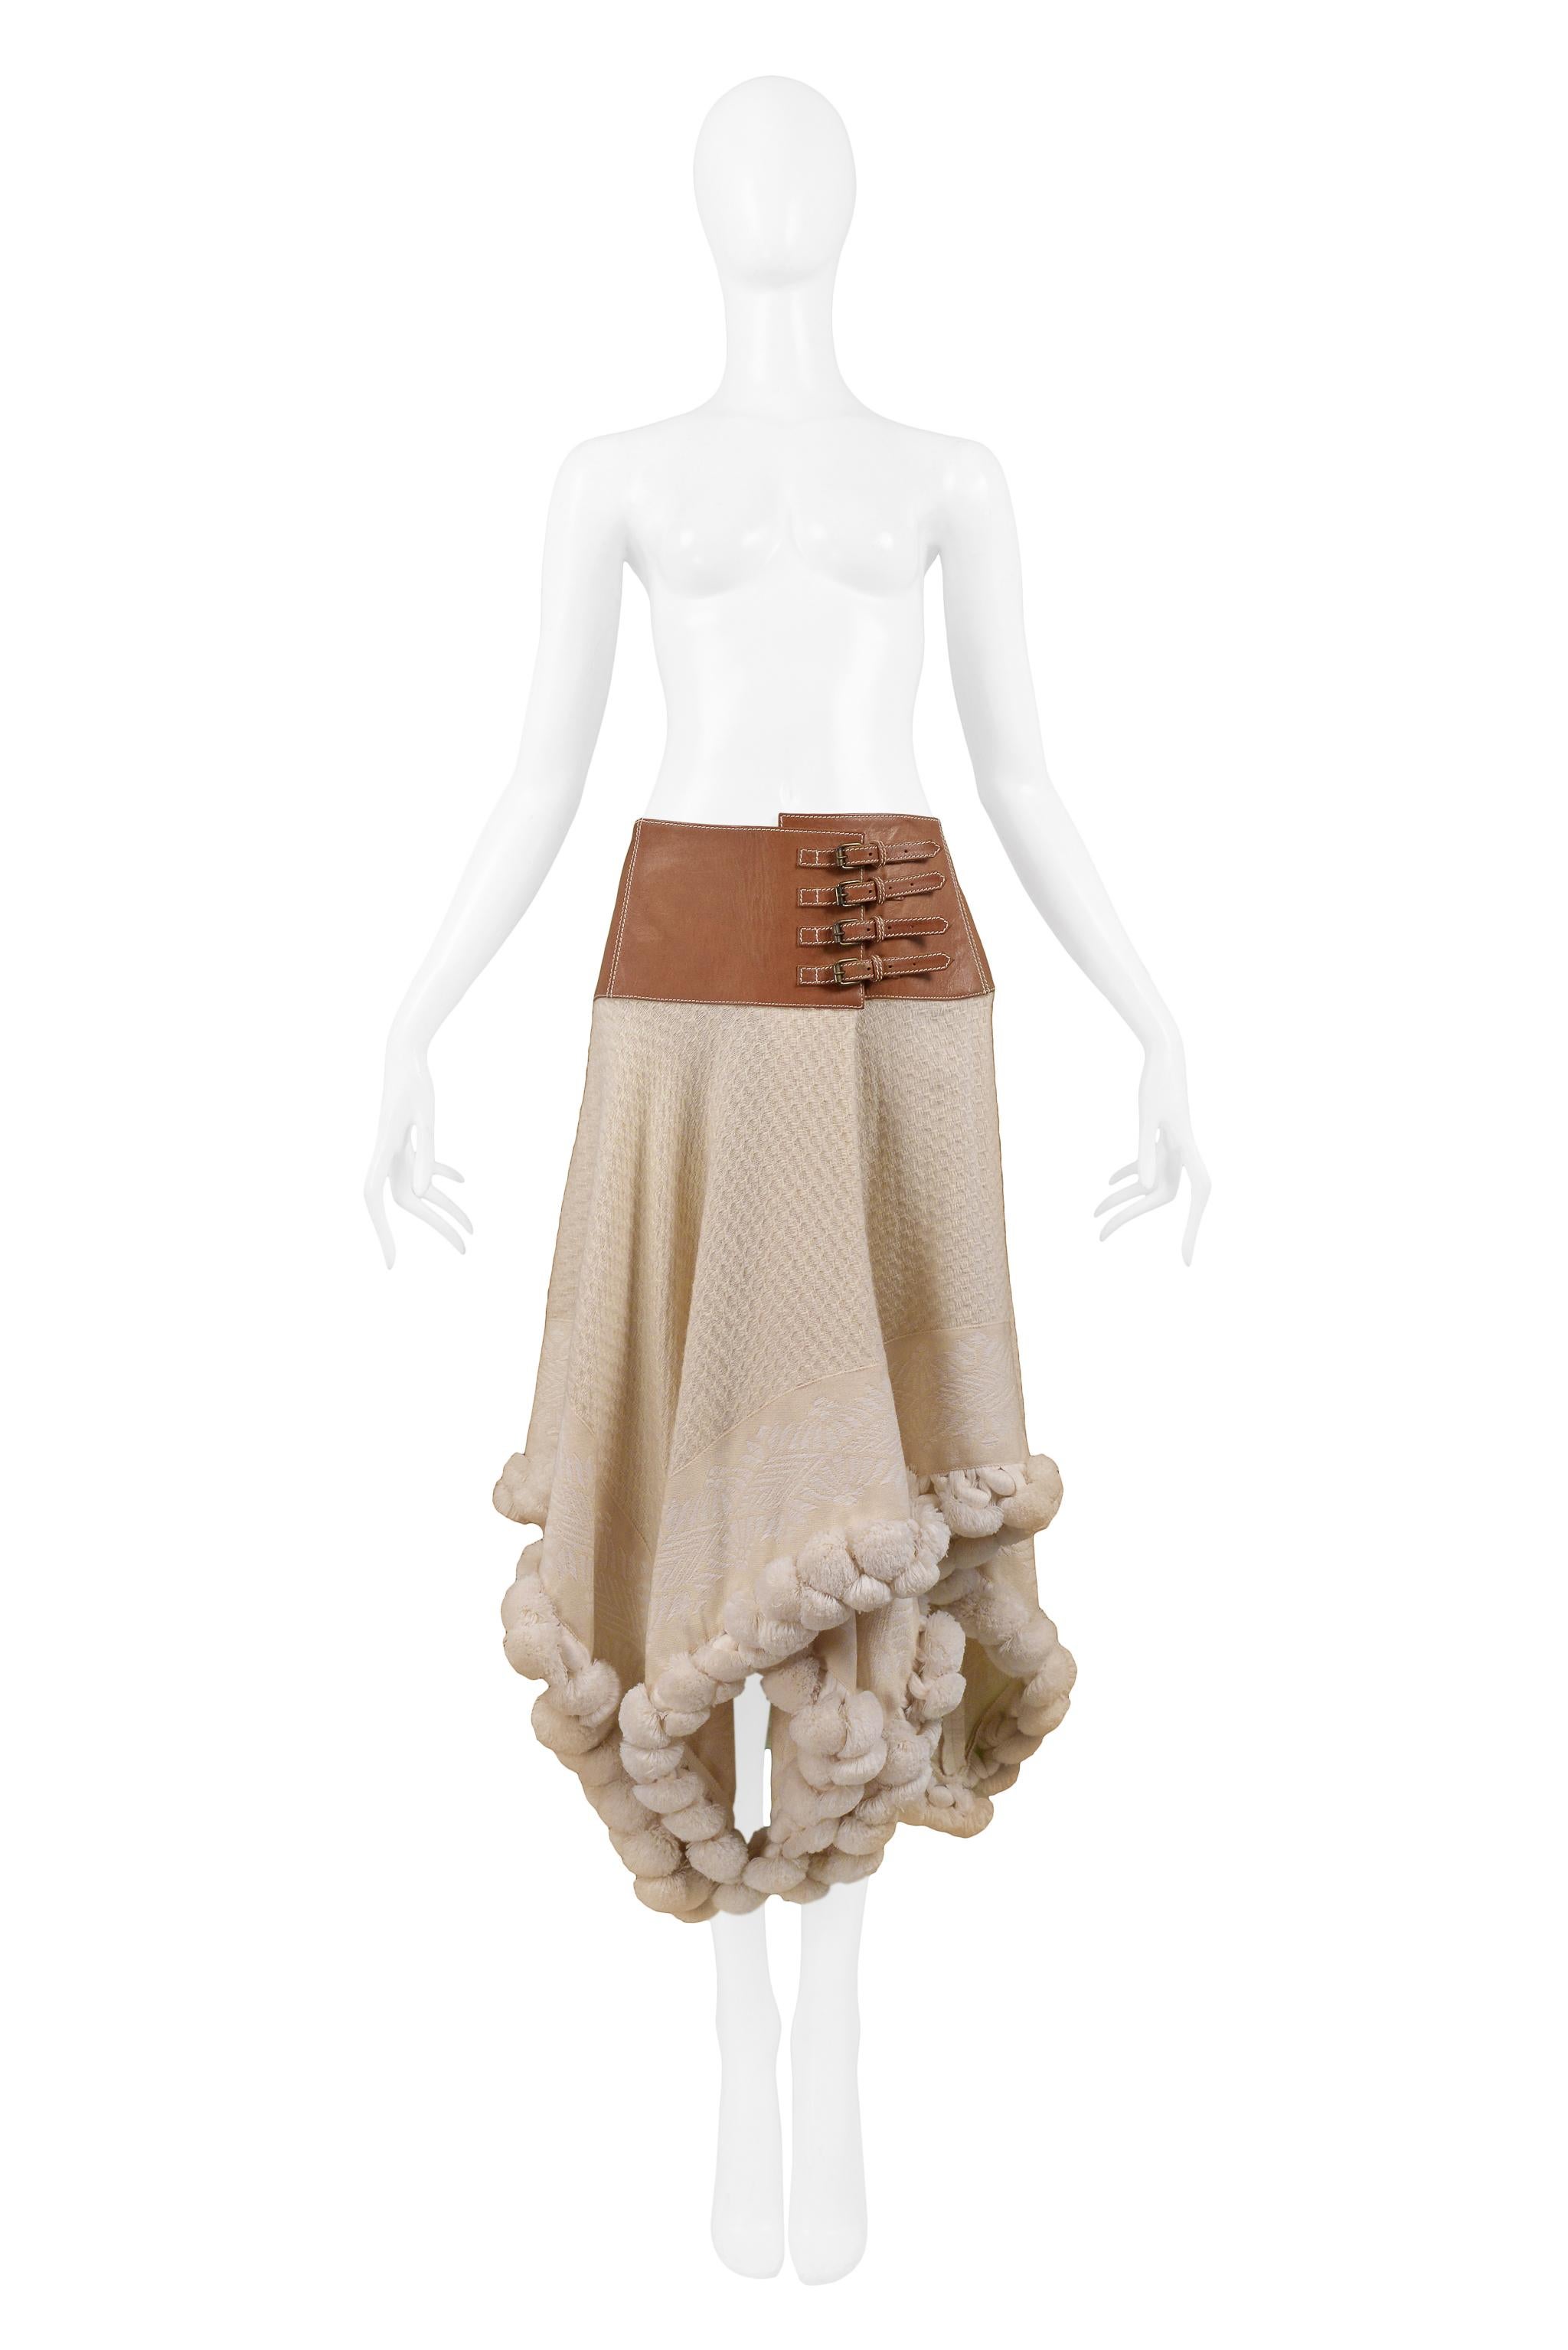 Vintage Alexander McQueen cream wool knit skirt featuring attached cognac brown leather belt with four buckles, oversized pom-poms at hem, and asymmetrical hemline. Collection 2003.

Excellent Vintage Condition

Size 42